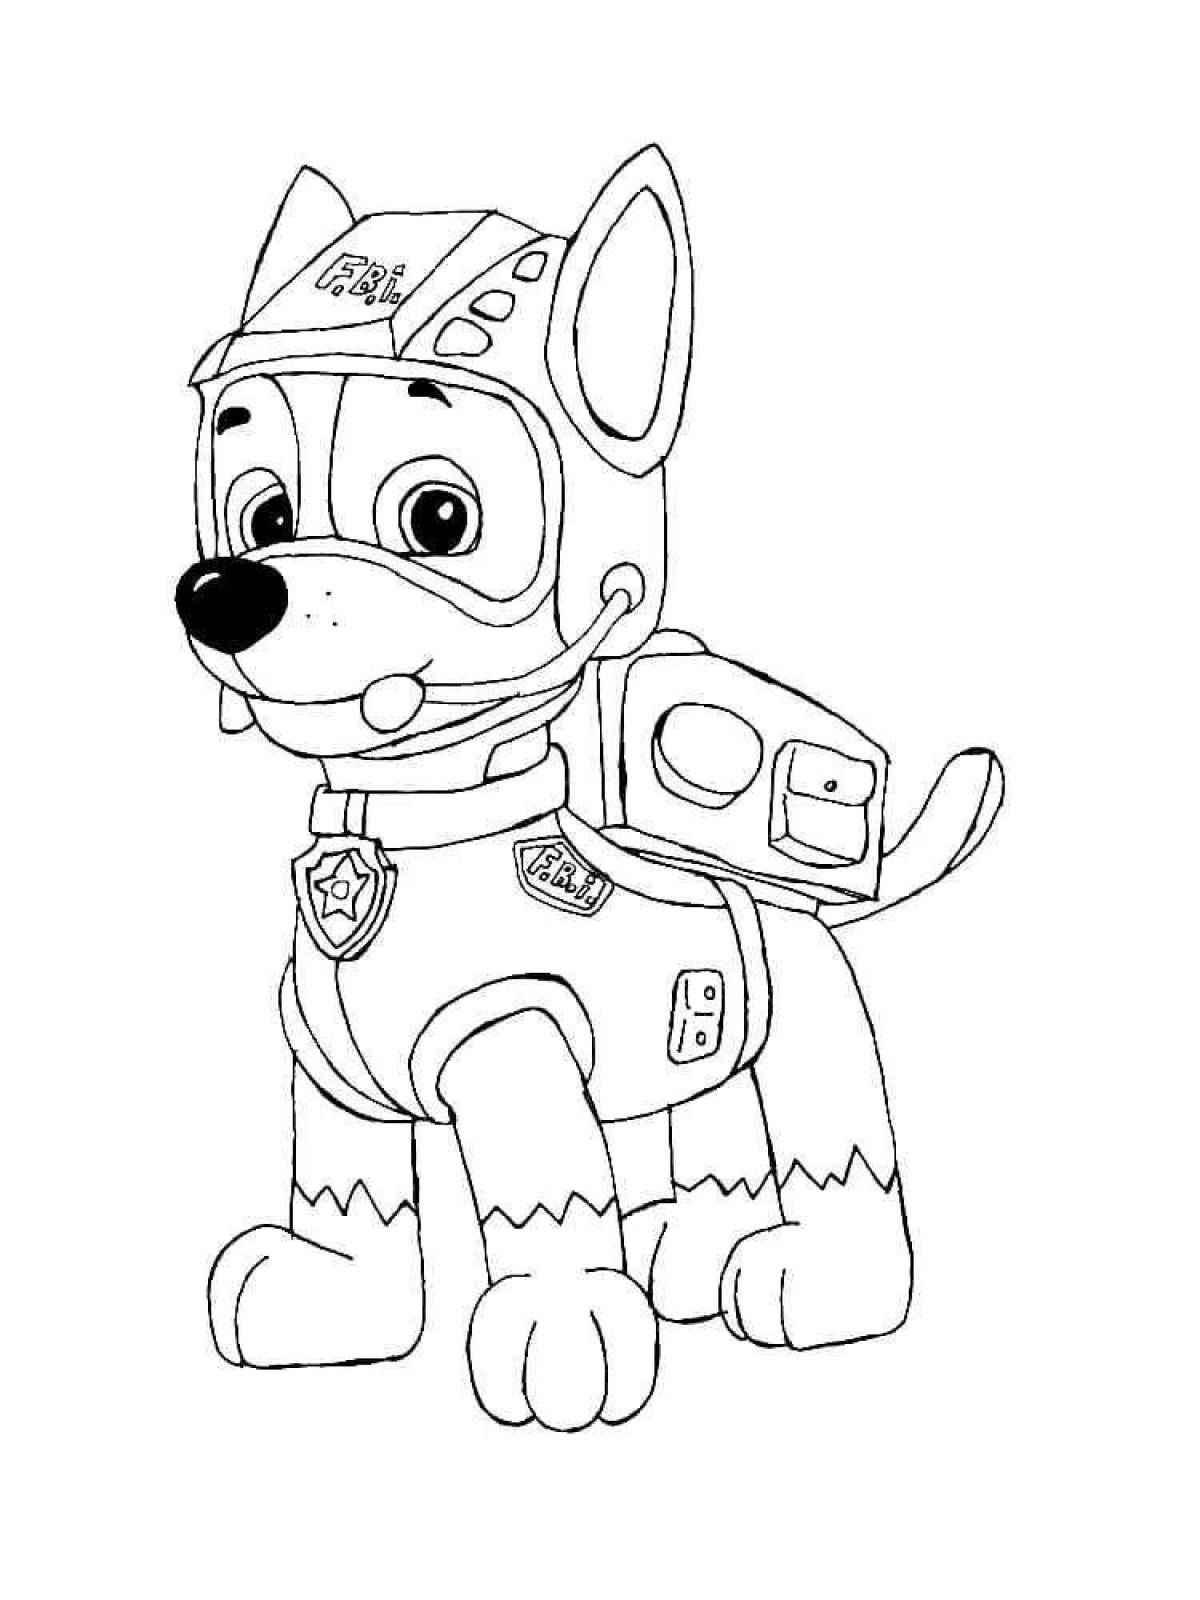 Live coloring racer